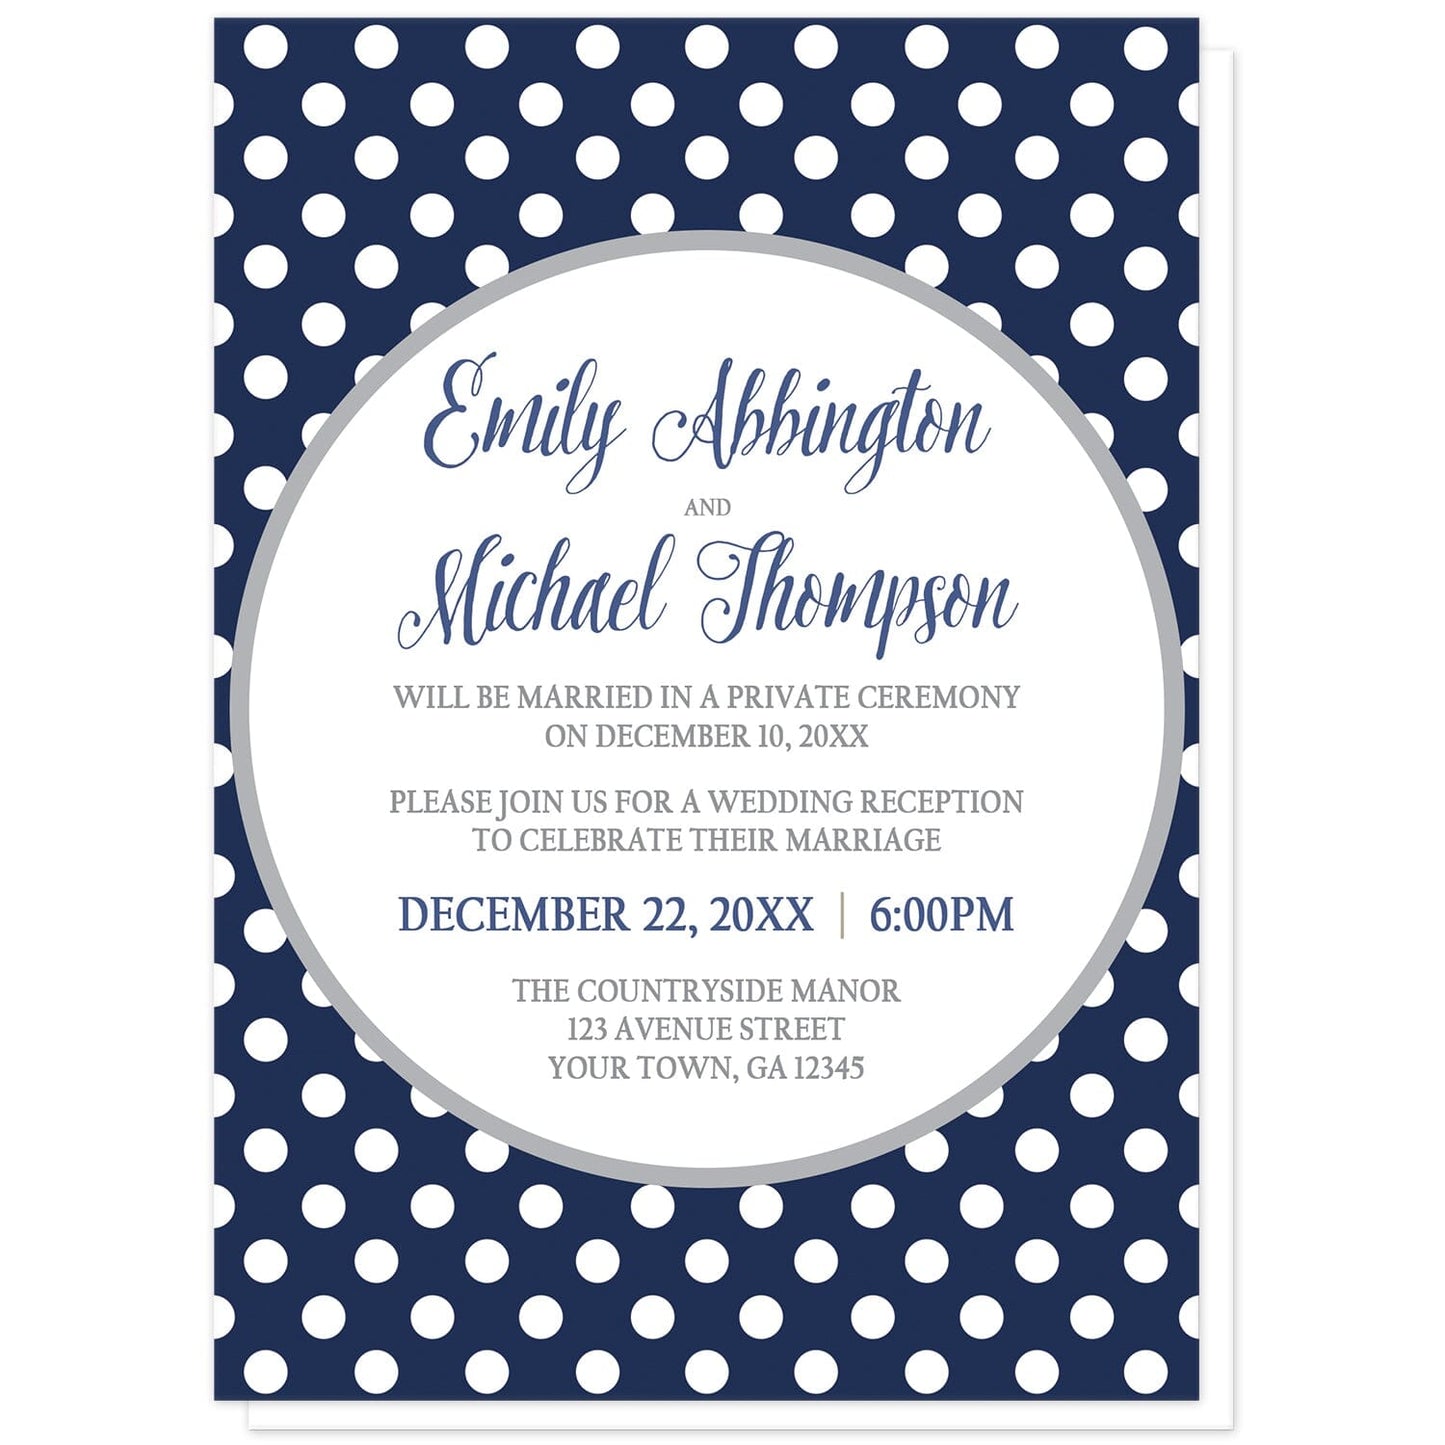 Gray Navy Blue Polka Dot Reception Only Invitations at Artistically Invited. Gray navy blue polka dot reception only invitations with your personalized post-wedding reception celebration details custom printed in navy blue and gray inside a white circle outlined in light gray, over a navy blue polka dot pattern with white polka dots over blue.